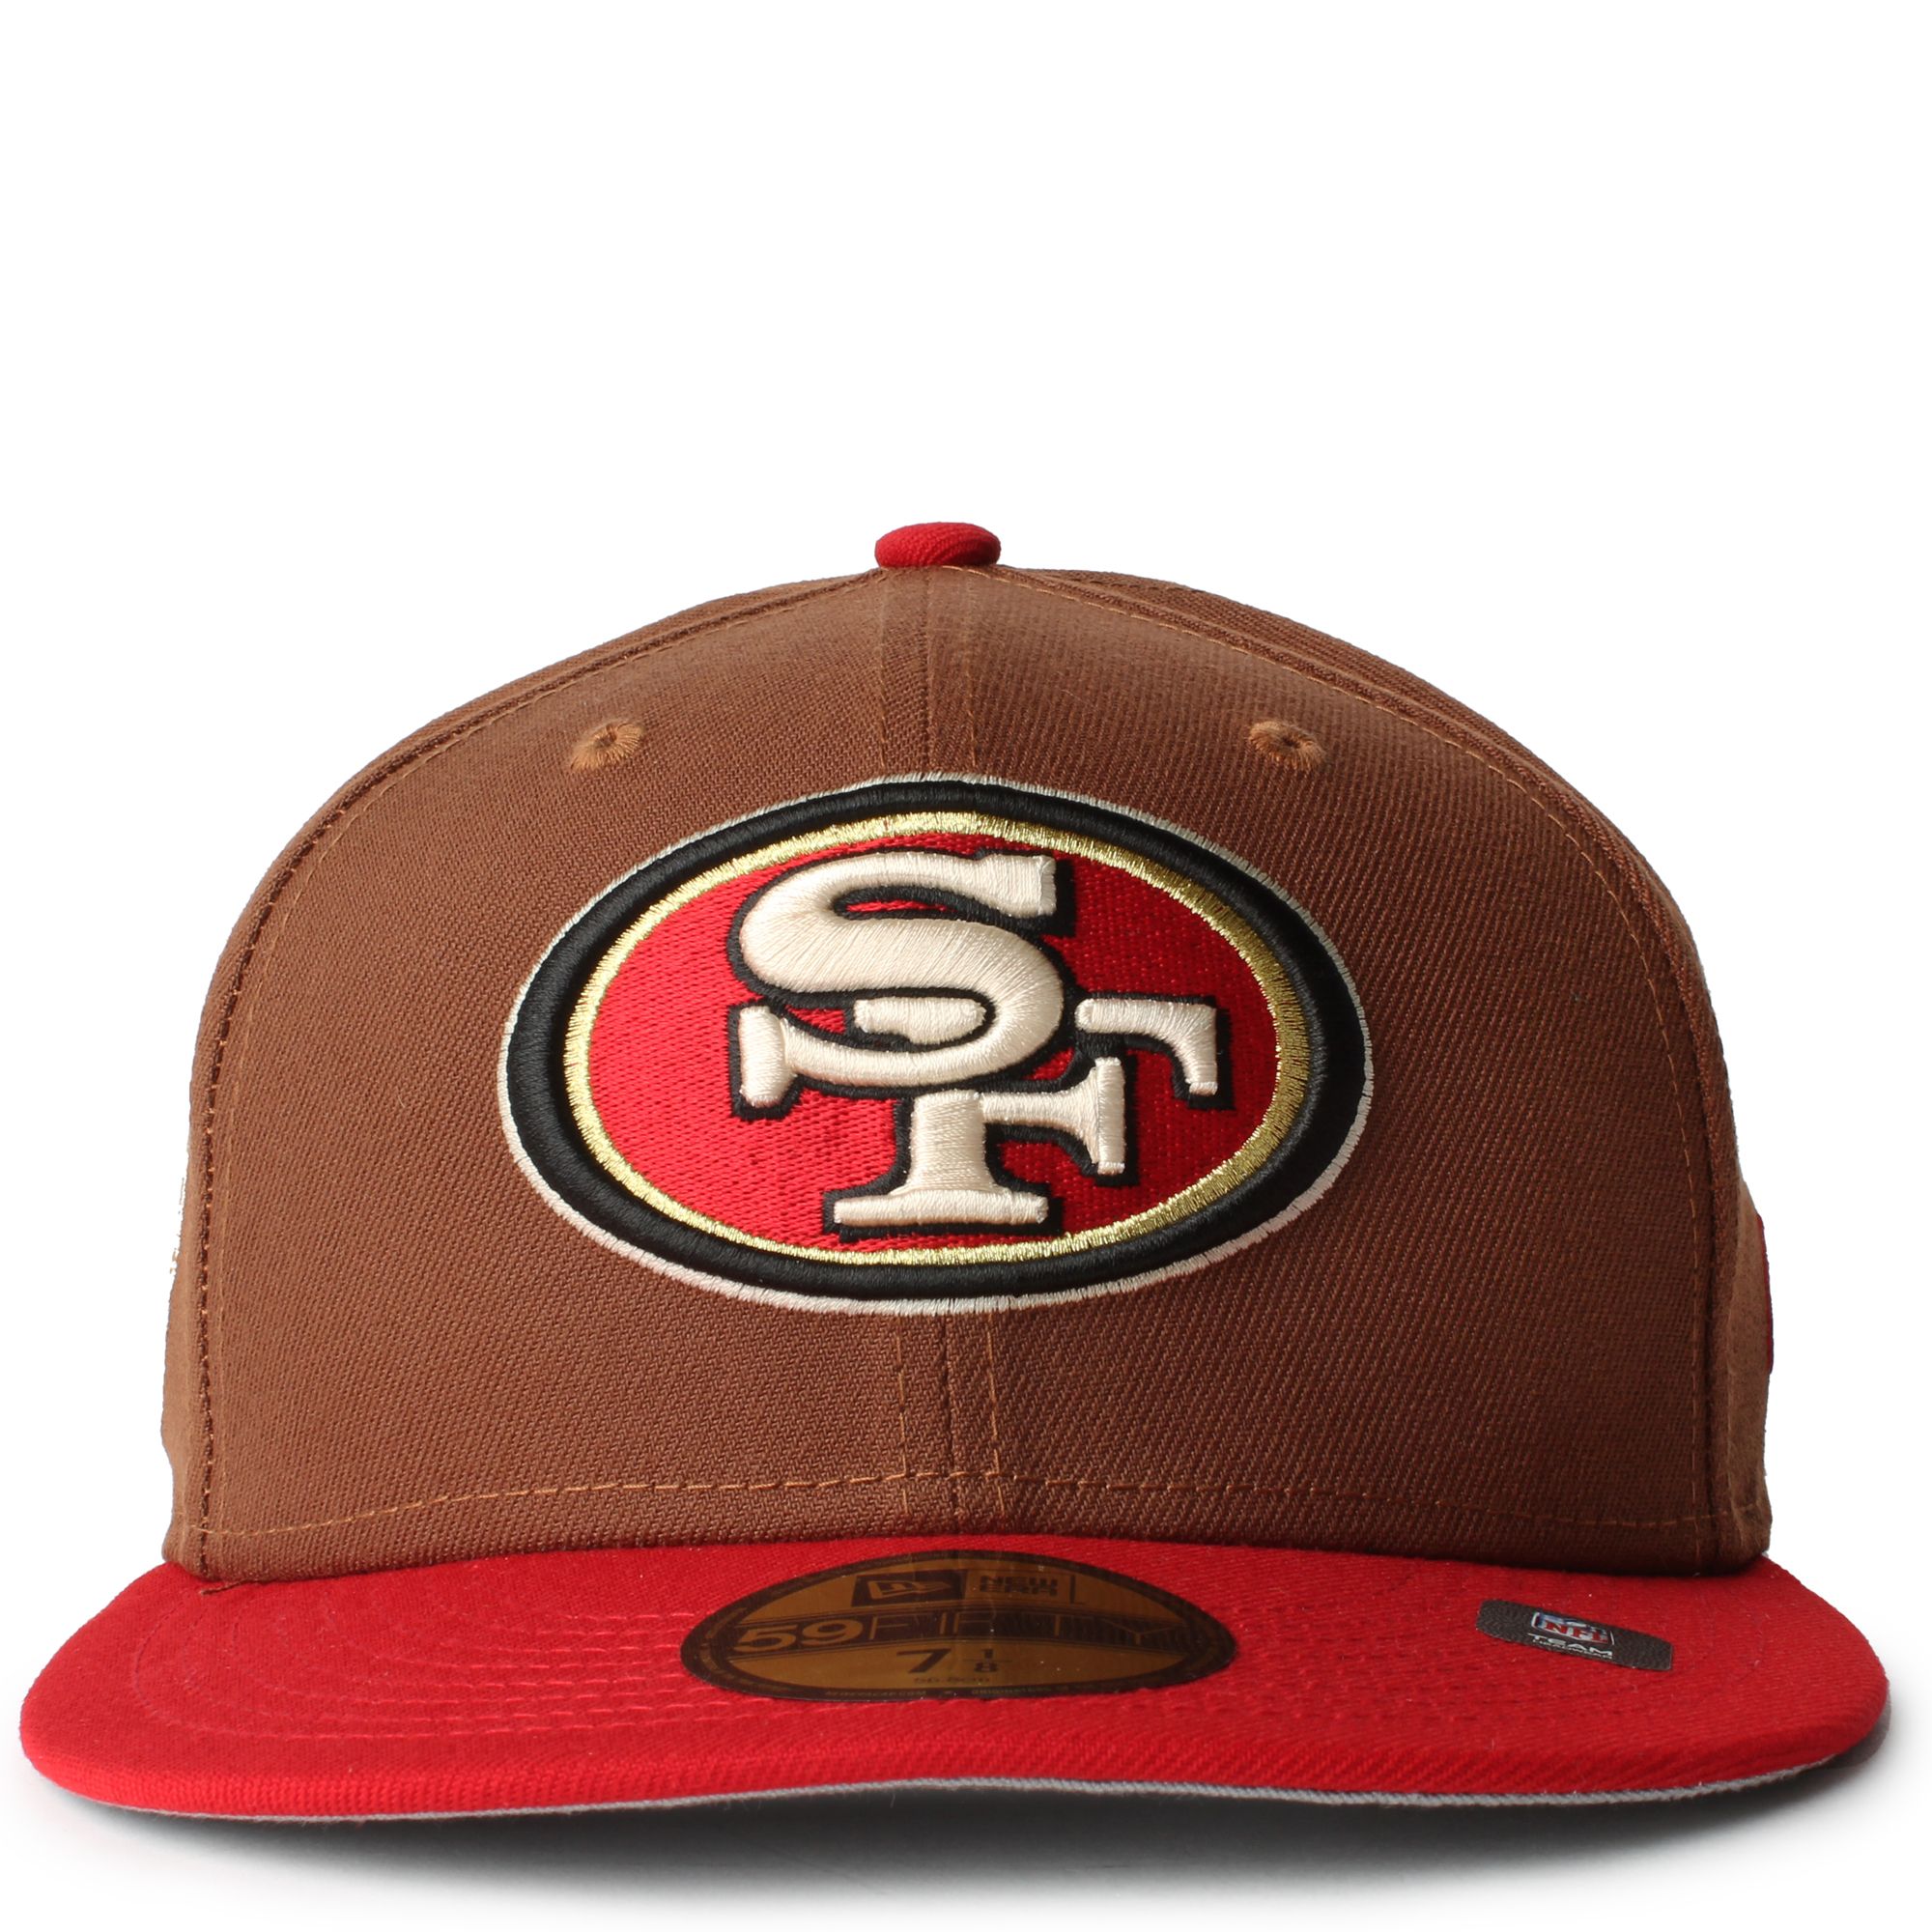 New Era 59FIFTY San Francisco 49ers Harvest Brown Red Fitted Hat